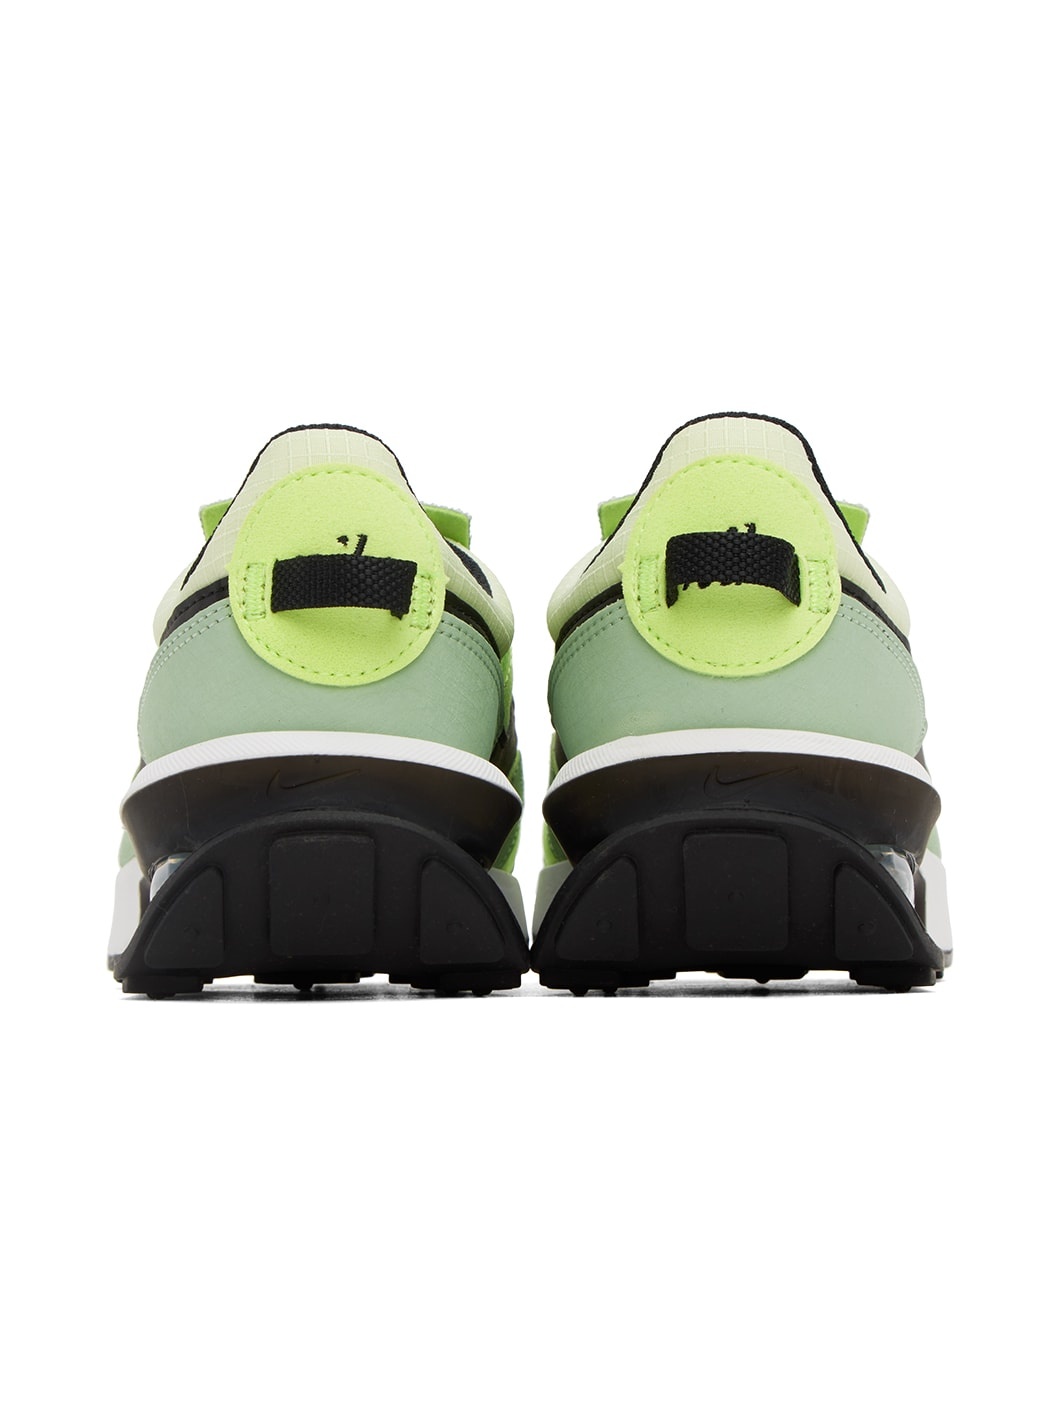 Green Air Max Pre-Day Sneakers - 2